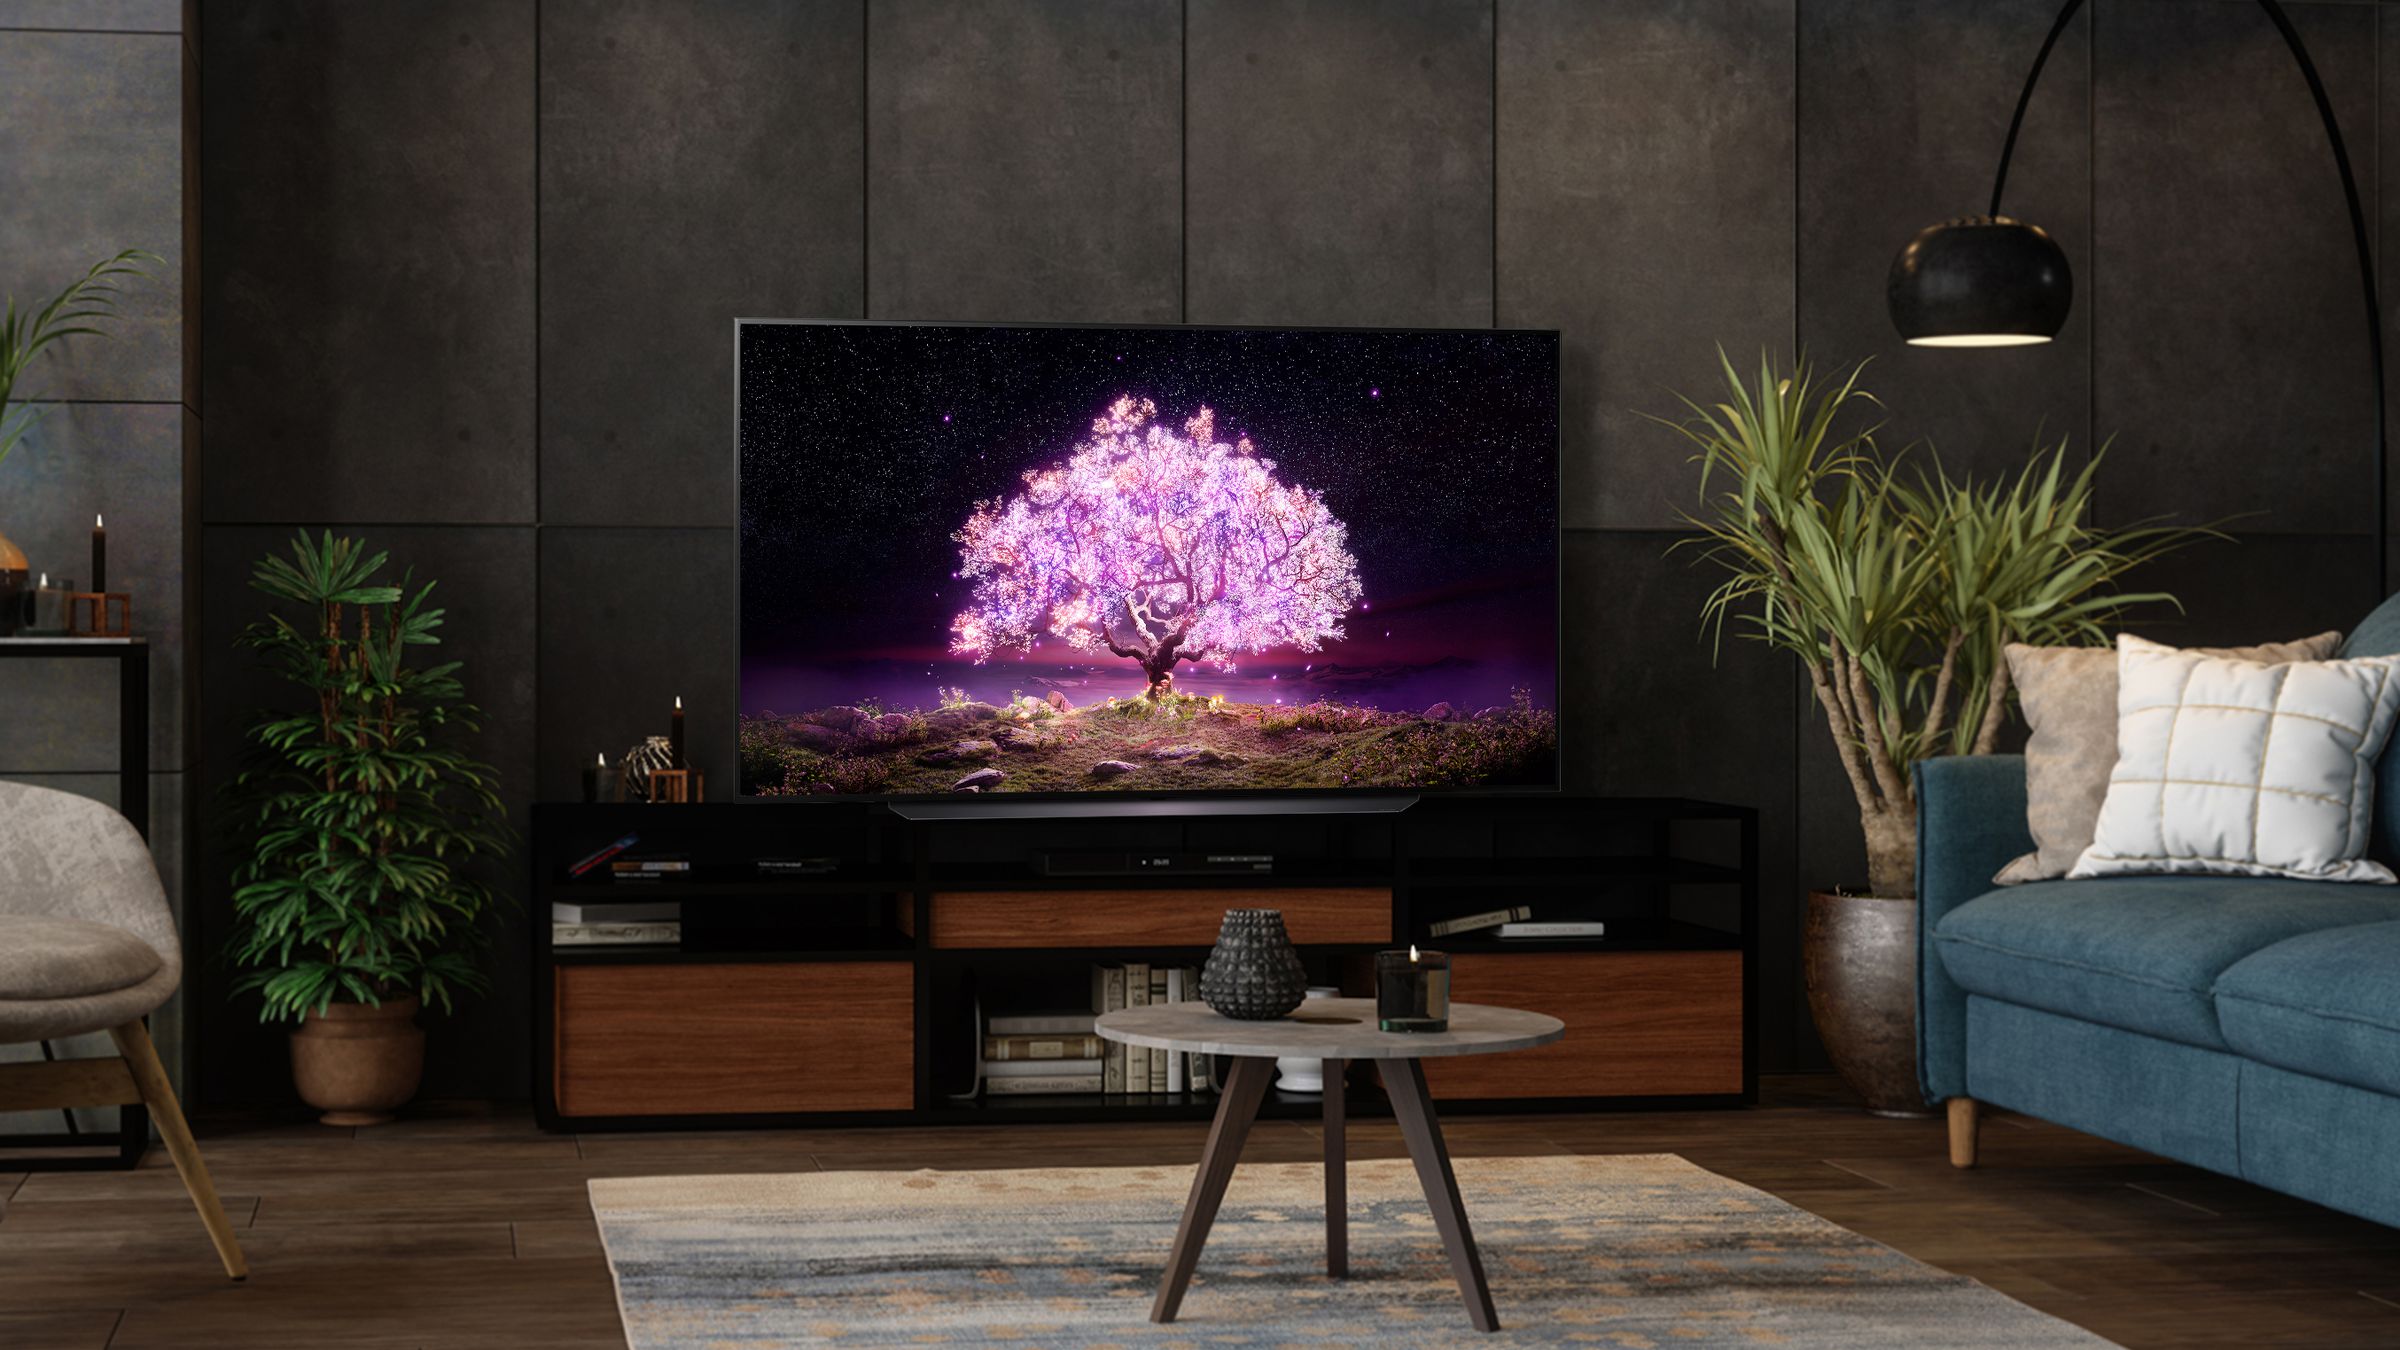 LG’s C1 OLED frequently goes on sale, but is worth considering even when it’s not available at an all-time low.